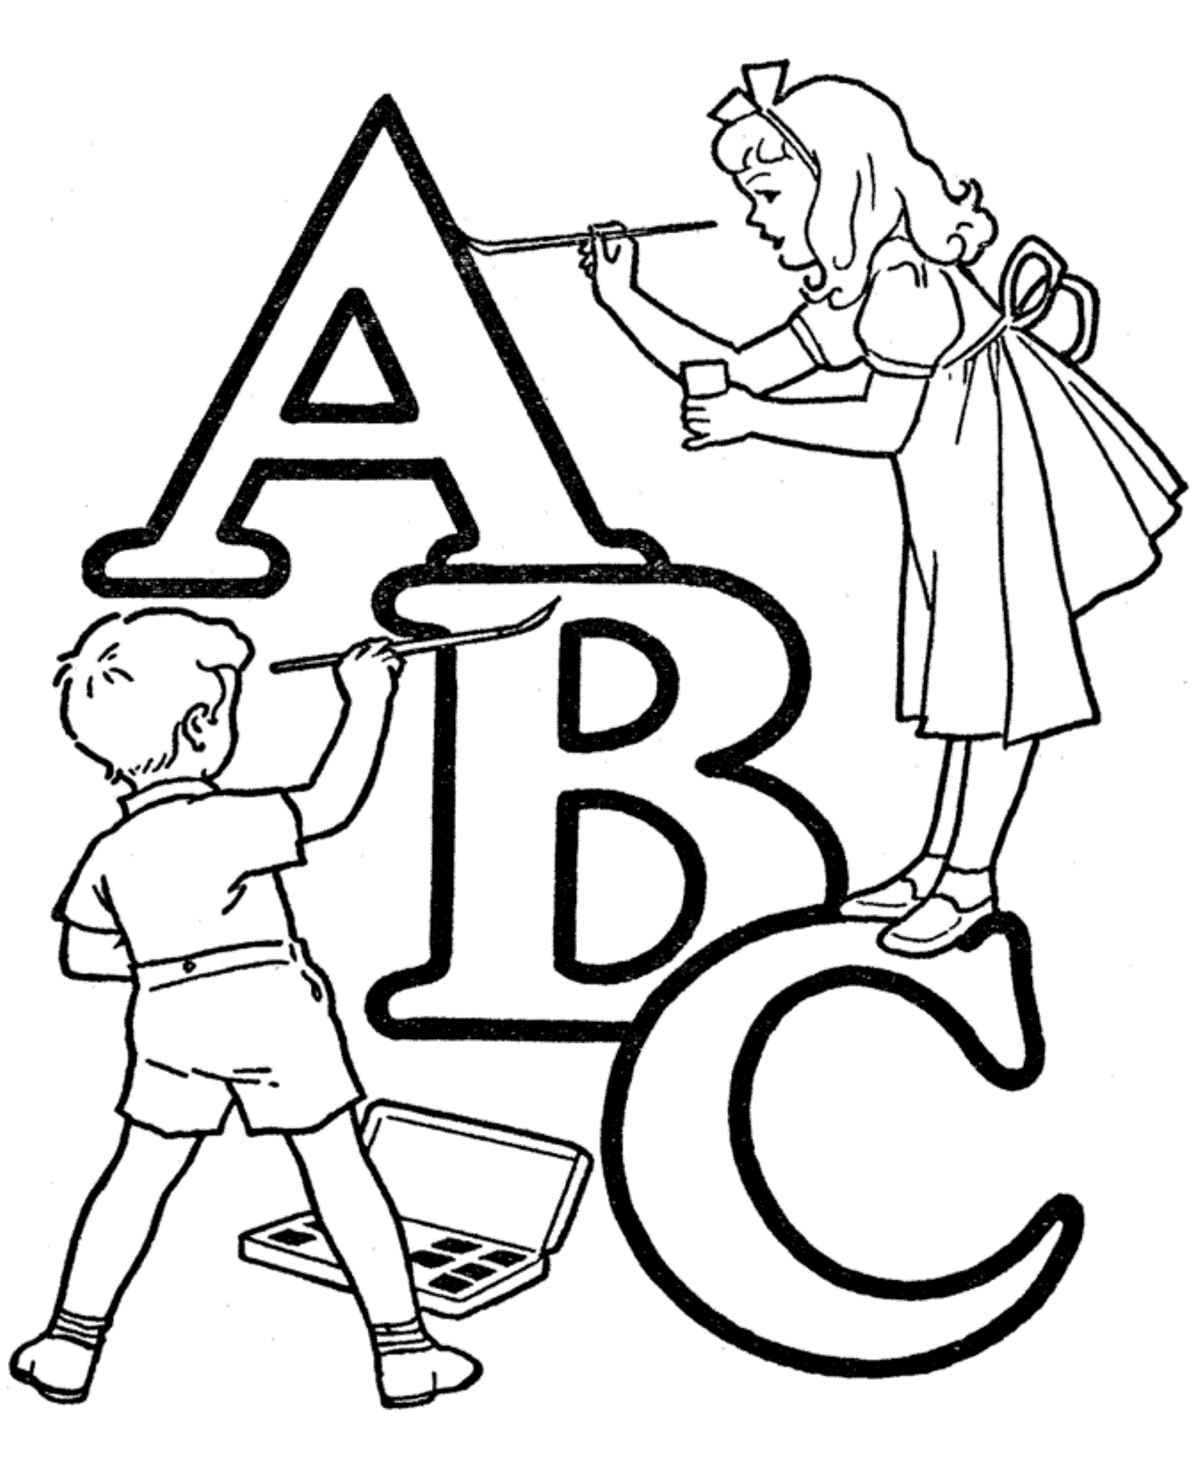 A B C Coloring Pages Printable Sheets Free Printable Abc Pages 2021 a 0033 Coloring4free